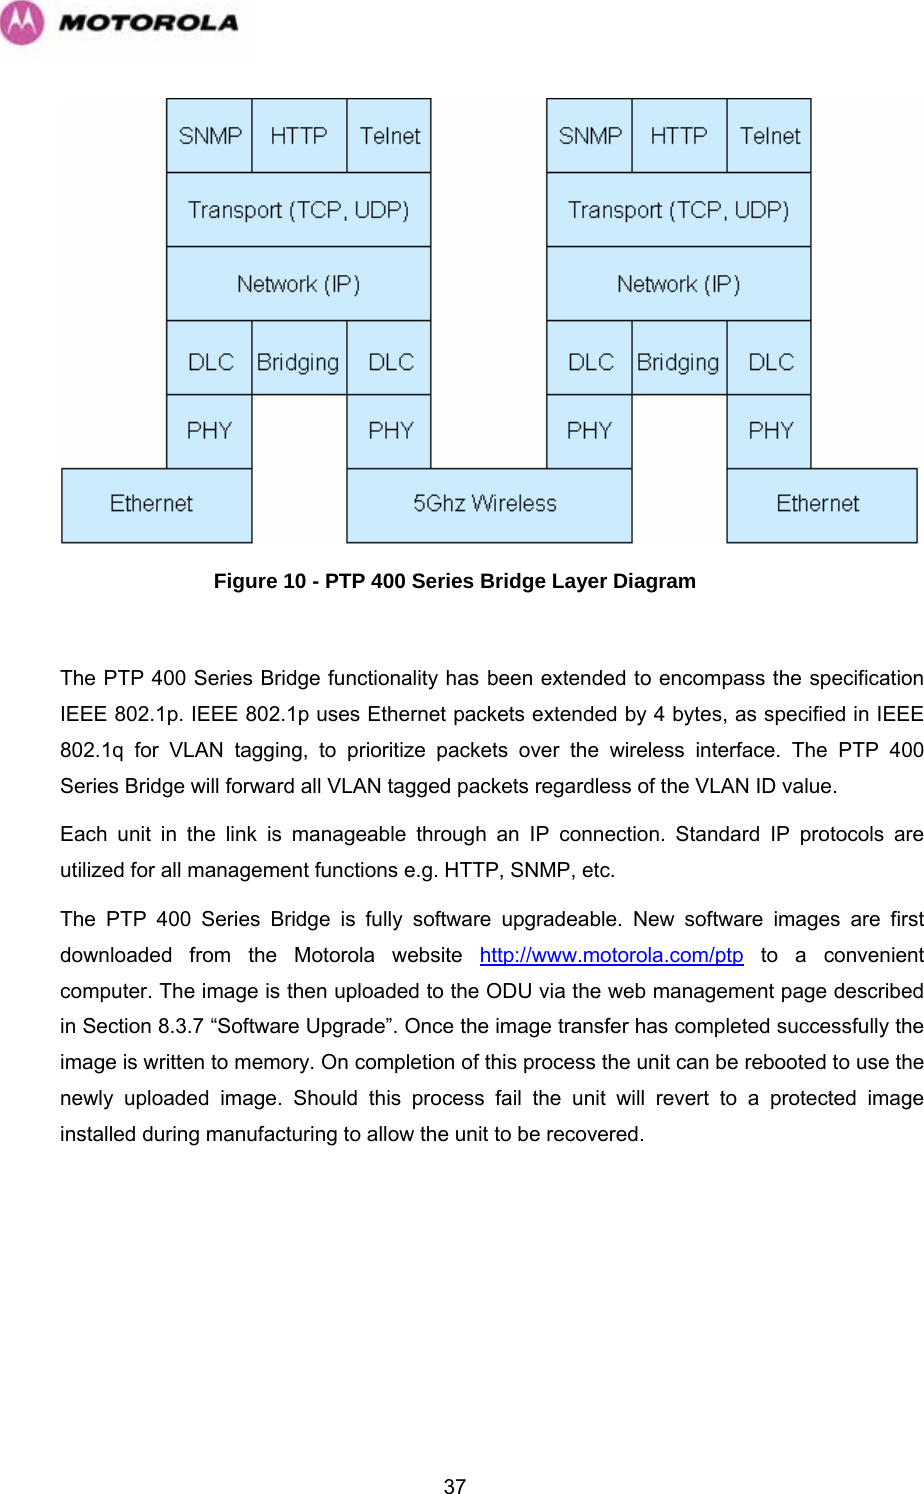   37 Figure 10 - PTP 400 Series Bridge Layer Diagram  The PTP 400 Series Bridge functionality has been extended to encompass the specification IEEE 802.1p. IEEE 802.1p uses Ethernet packets extended by 4 bytes, as specified in IEEE 802.1q for VLAN tagging, to prioritize packets over the wireless interface. The PTP 400 Series Bridge will forward all VLAN tagged packets regardless of the VLAN ID value. Each unit in the link is manageable through an IP connection. Standard IP protocols are utilized for all management functions e.g. HTTP, SNMP, etc. The PTP 400 Series Bridge is fully software upgradeable. New software images are first downloaded from the Motorola website http://www.motorola.com/ptp to a convenient computer. The image is then uploaded to the ODU via the web management page described in Section 8.3.7 “Software Upgrade”. Once the image transfer has completed successfully the image is written to memory. On completion of this process the unit can be rebooted to use the newly uploaded image. Should this process fail the unit will revert to a protected image installed during manufacturing to allow the unit to be recovered.  